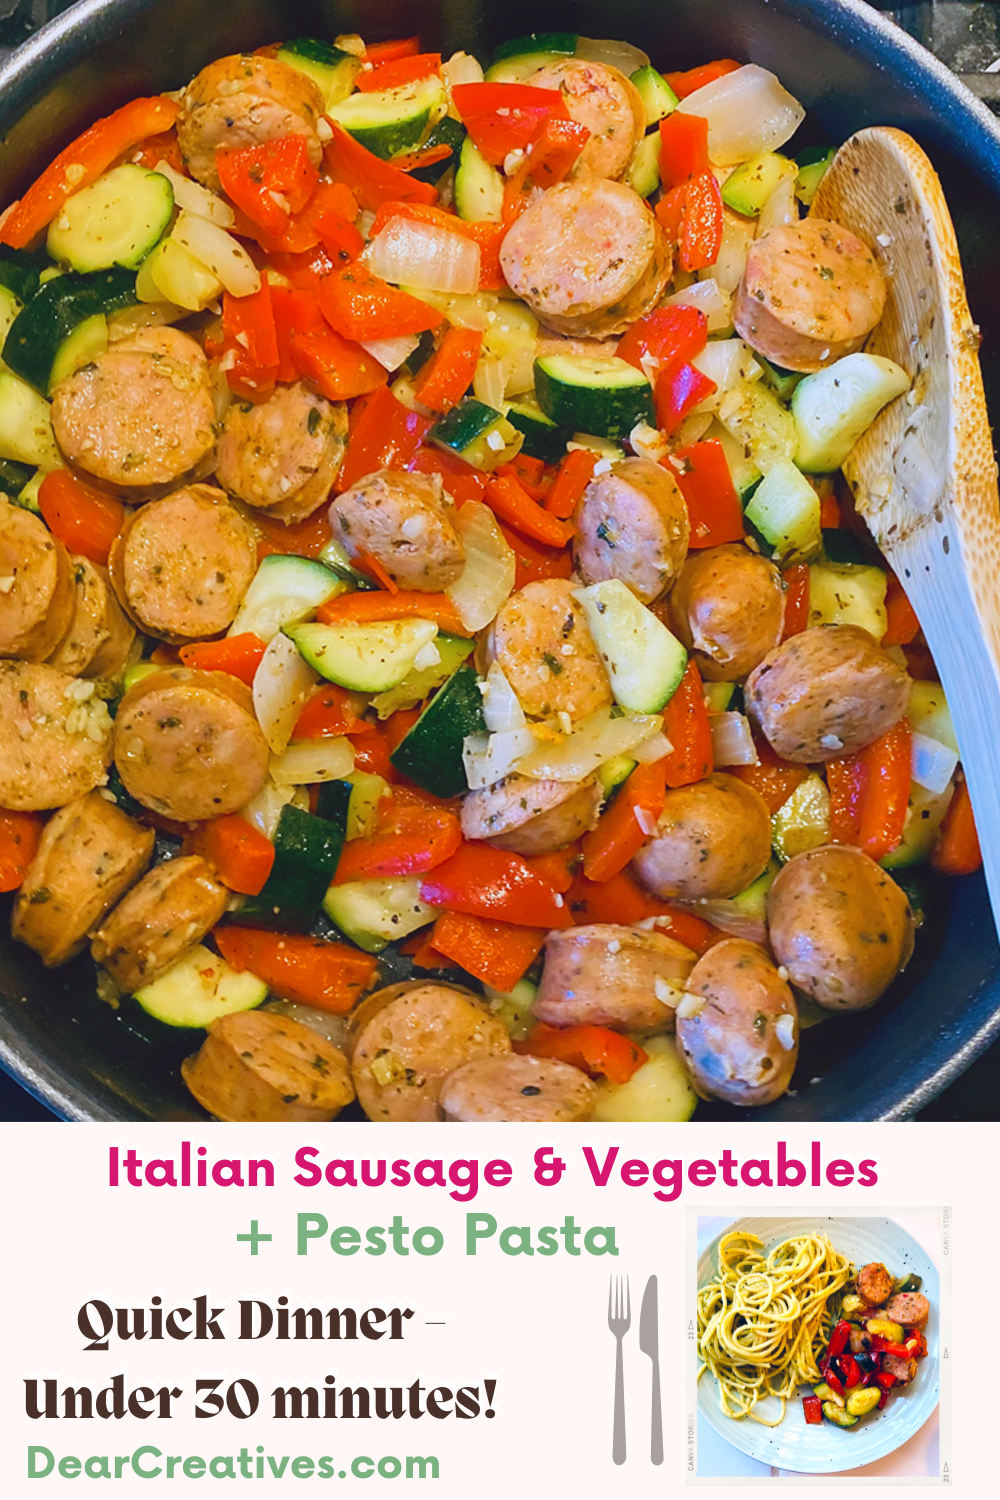 Italian Sausage and Vegetables with Pesto Pasta - Quick and Easy Dinner - Print the recipe at DearCreatives.com